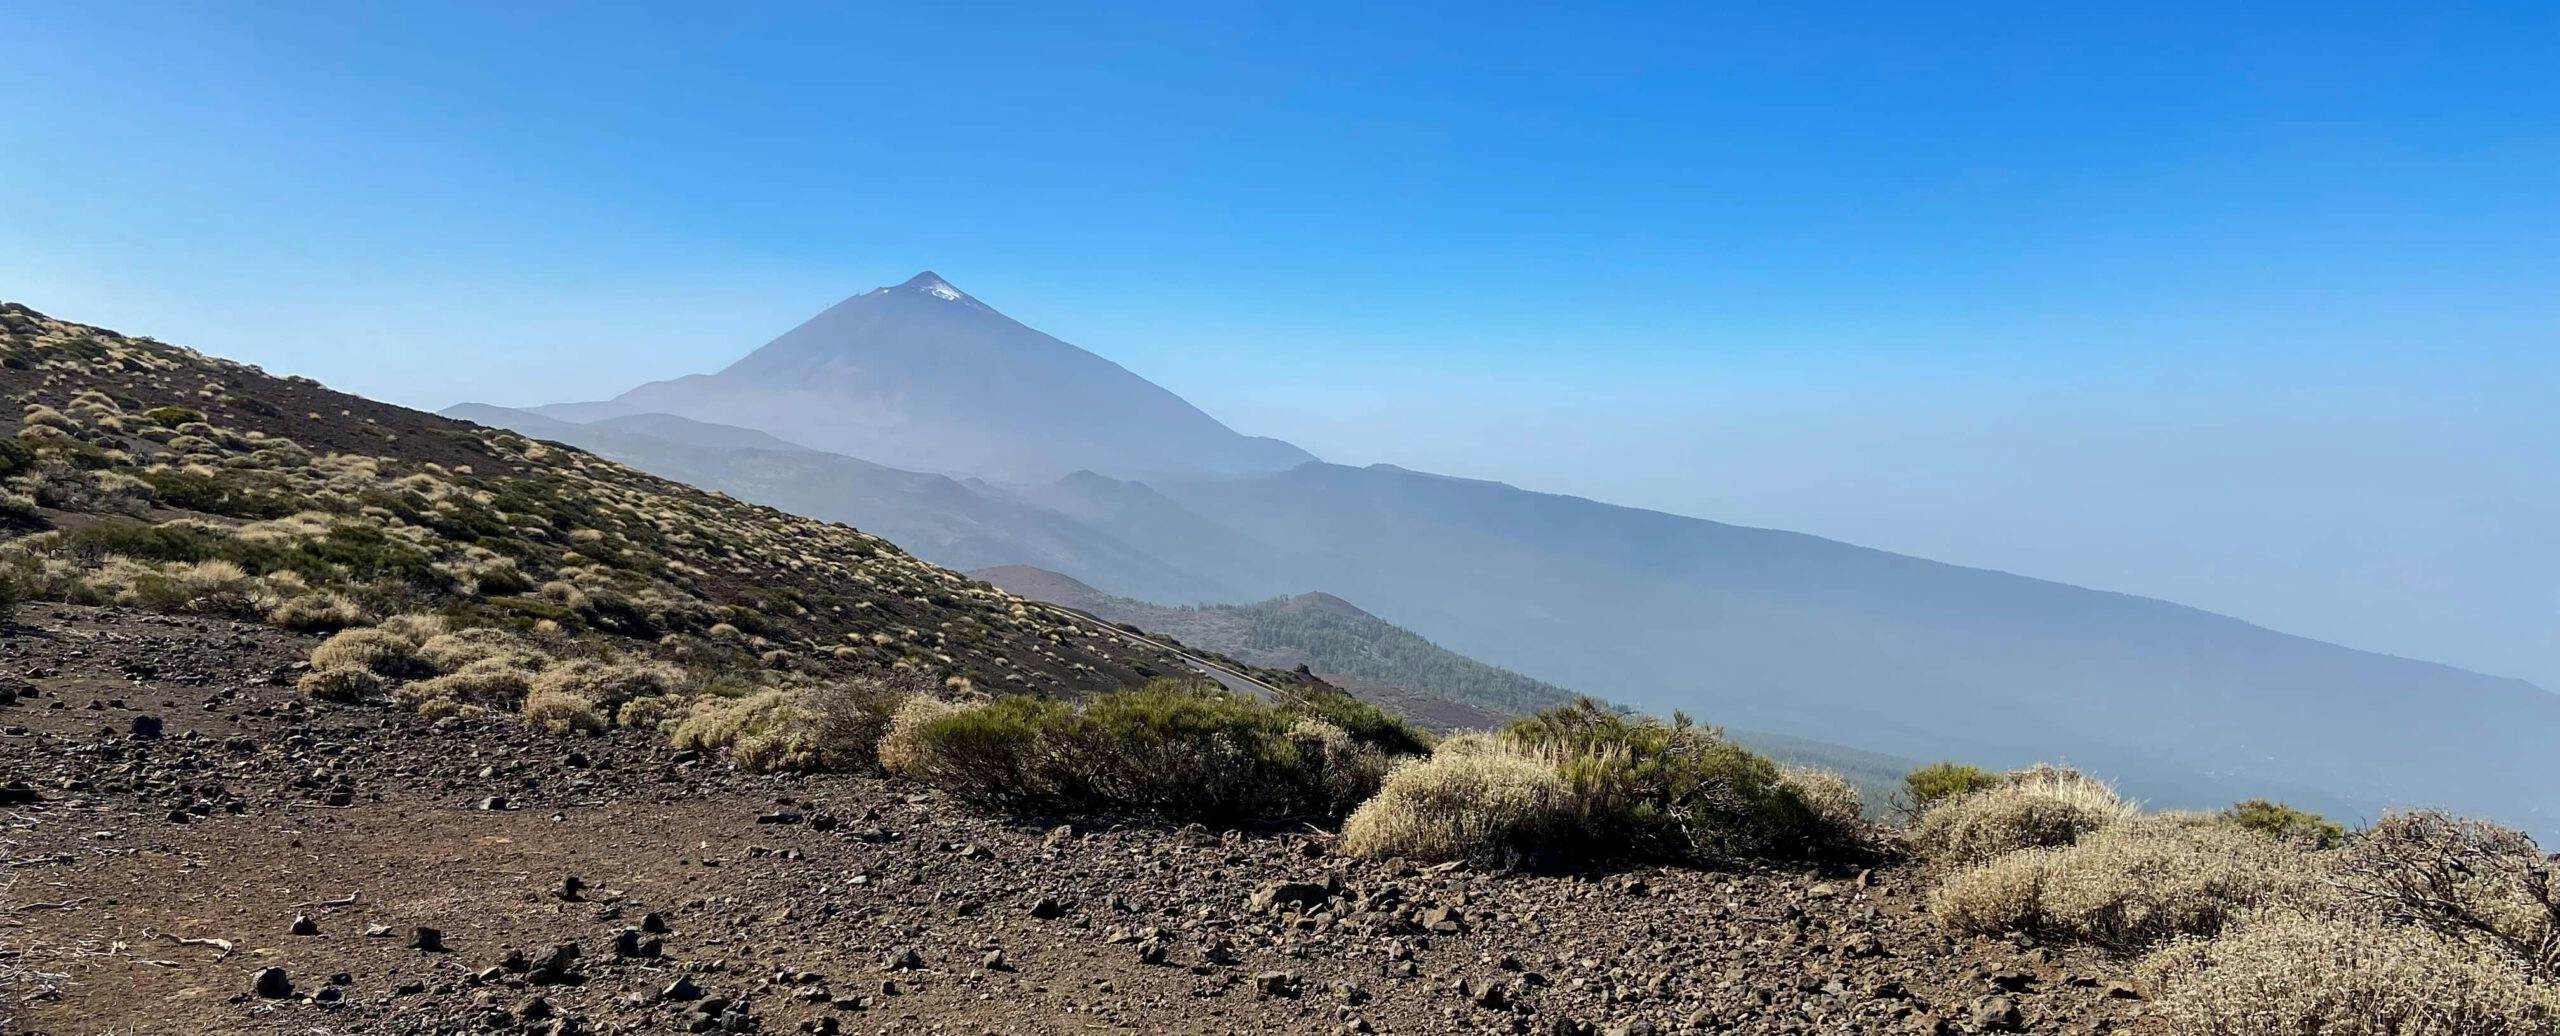 View of the Teide from the hiking trail on the Cumbre Dorsal of Tenerife